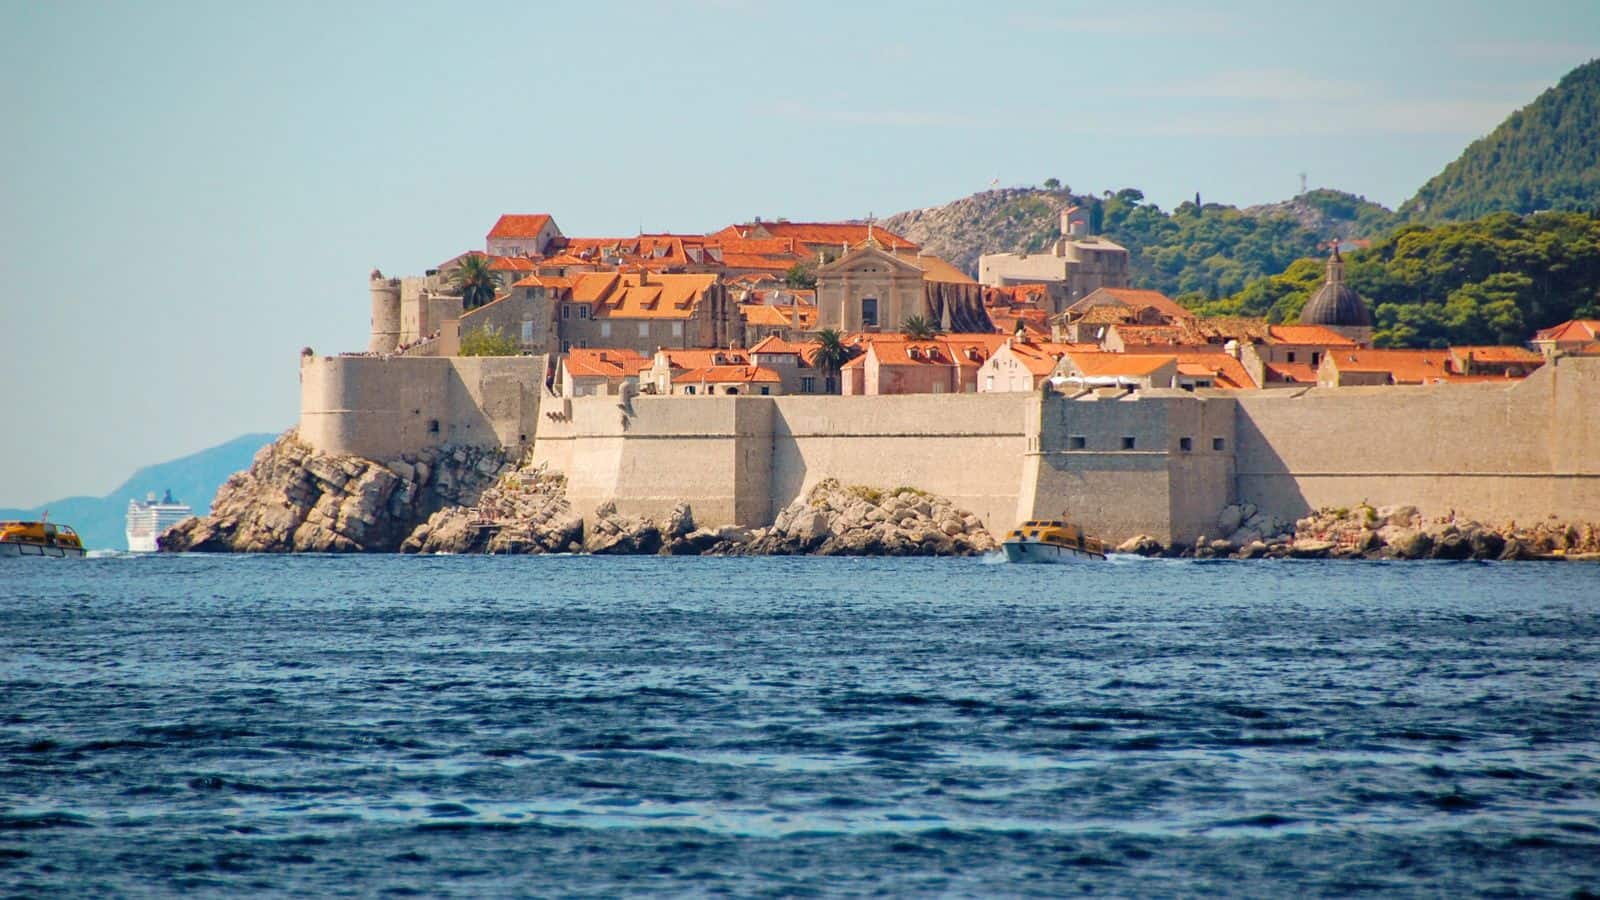 Stroll along Dubrovnik's ancient walls for some stunning views